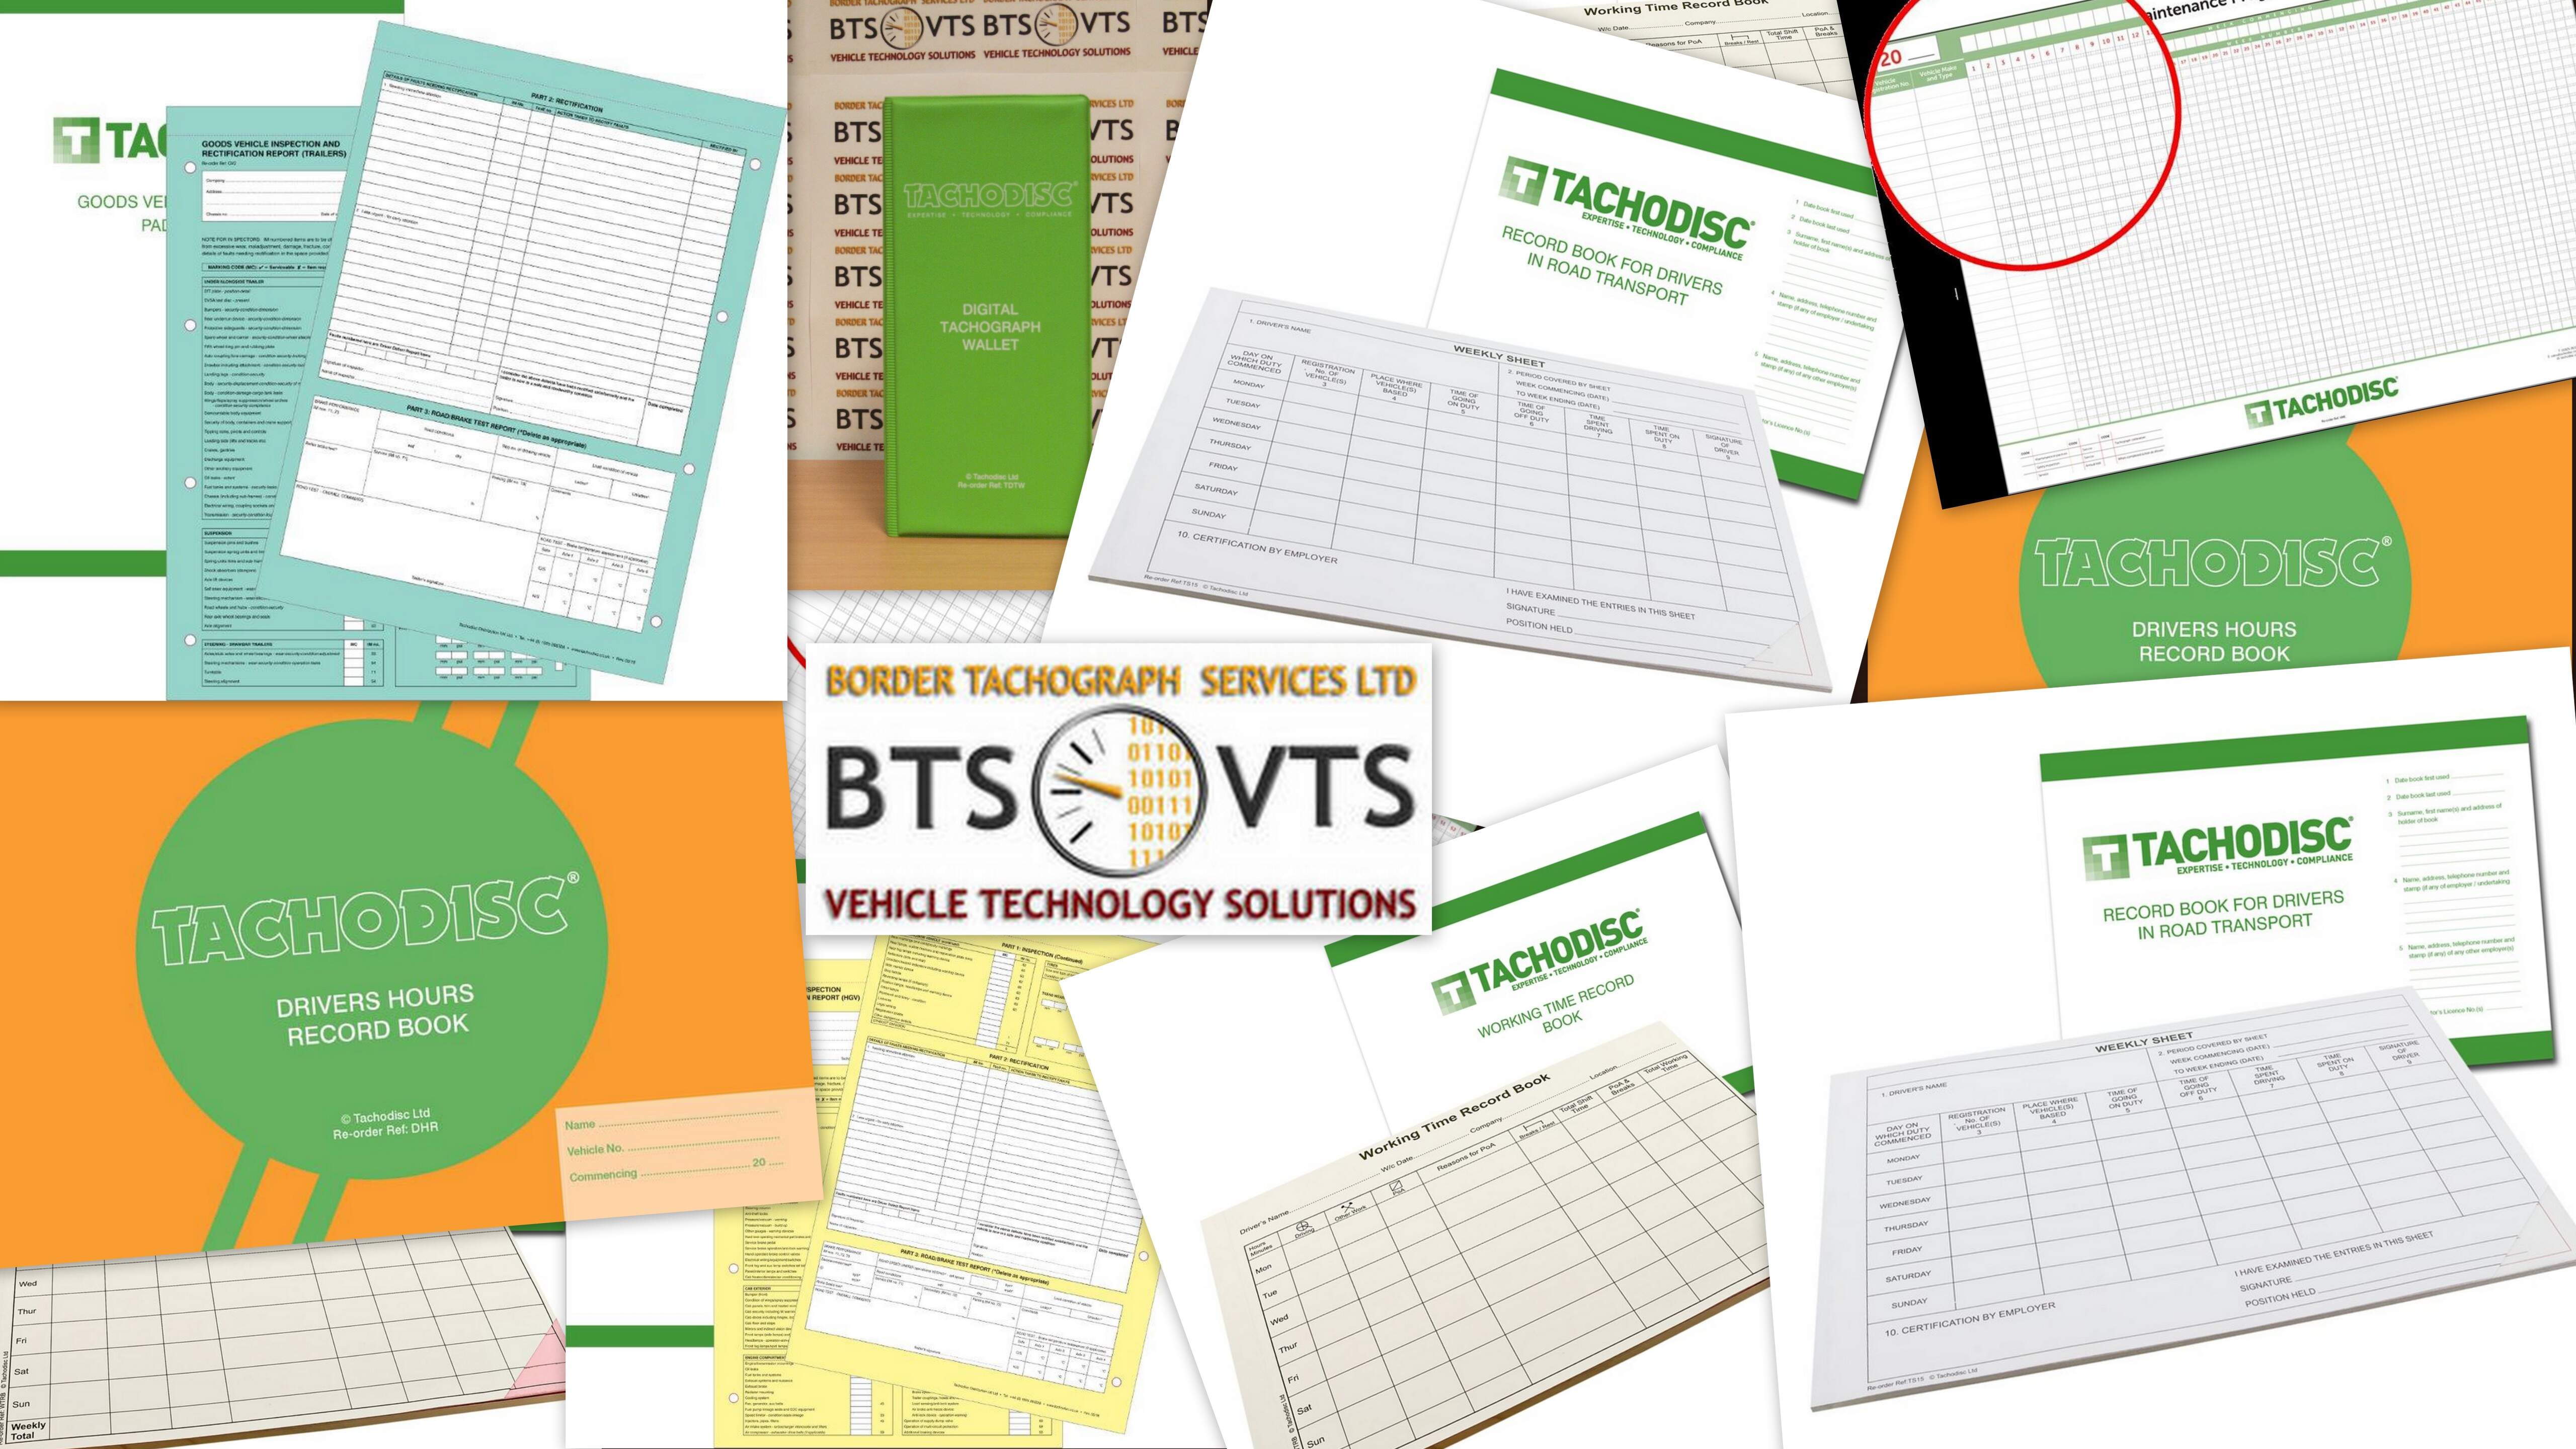 Picture of stationery sold by Border Tachograph Services Ltd